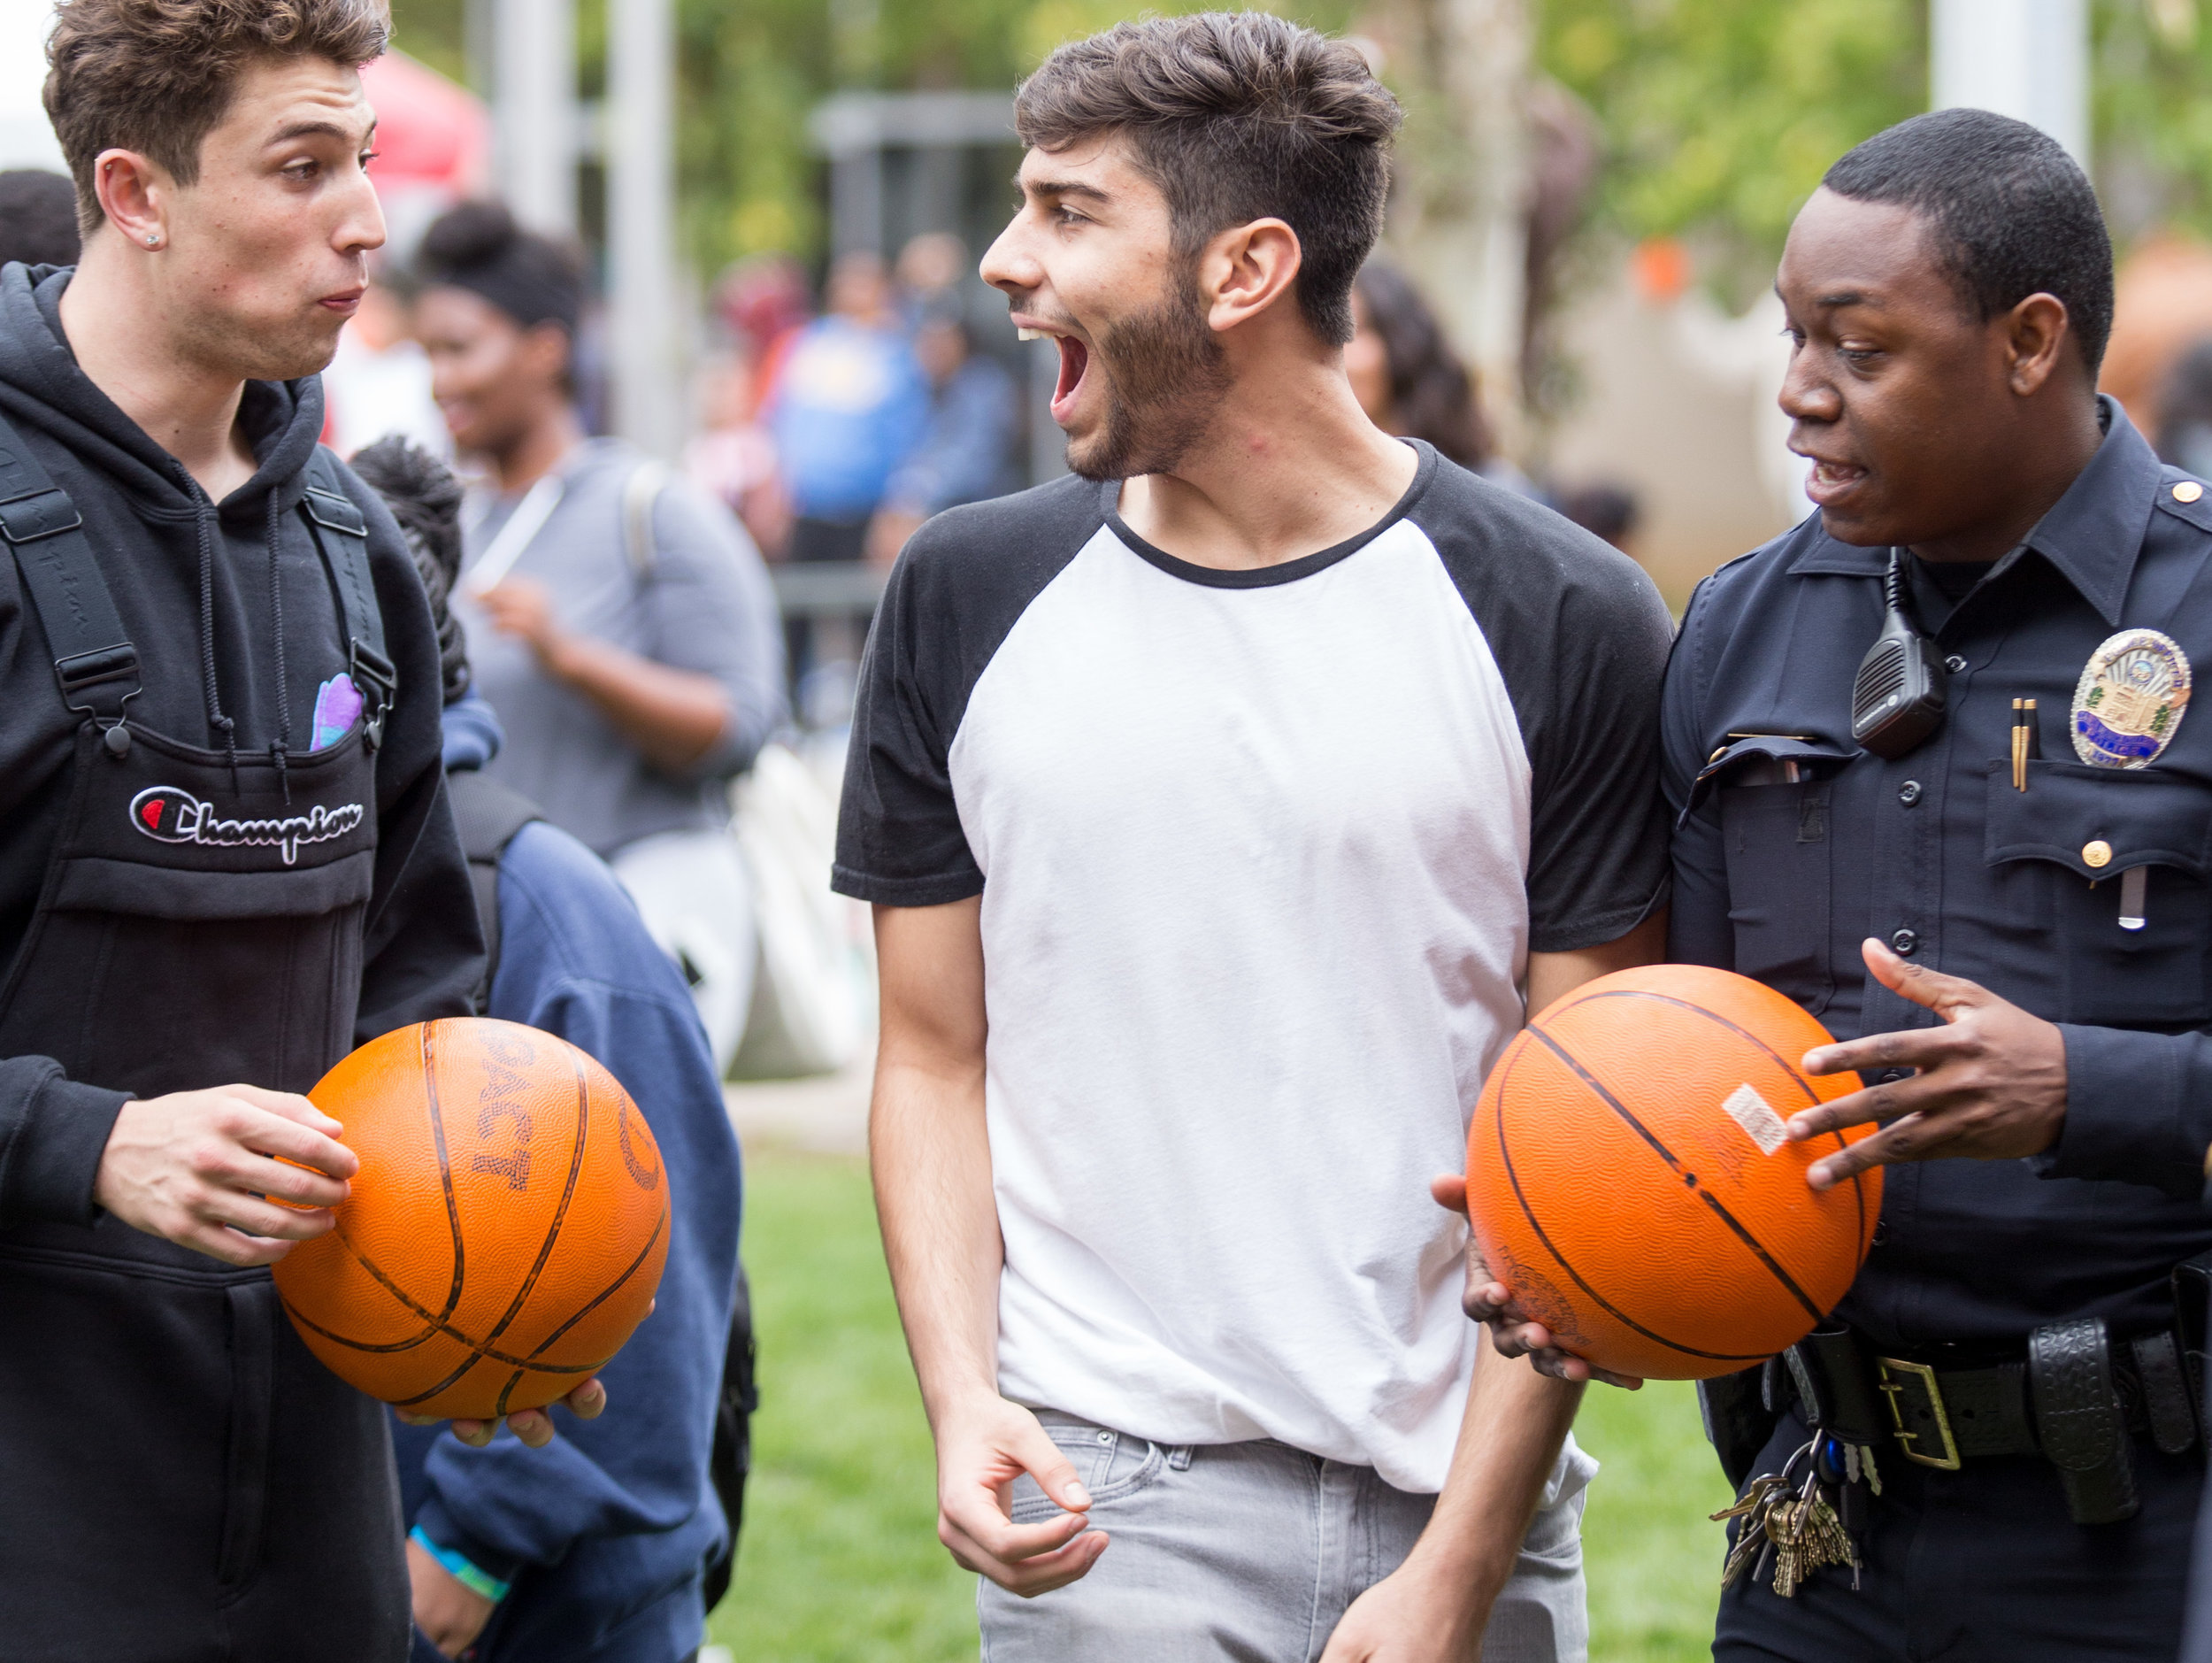  Cousins Marcus Nasrollahy (CQ left) and Eman Vafa (middle) shoot hoops with Santa Monica College Police Officer Jester (right) on the Santa Monica College's Main Campus Quad for the Associated Students' Homecoming Carnival on Halloween on Tuesday, O